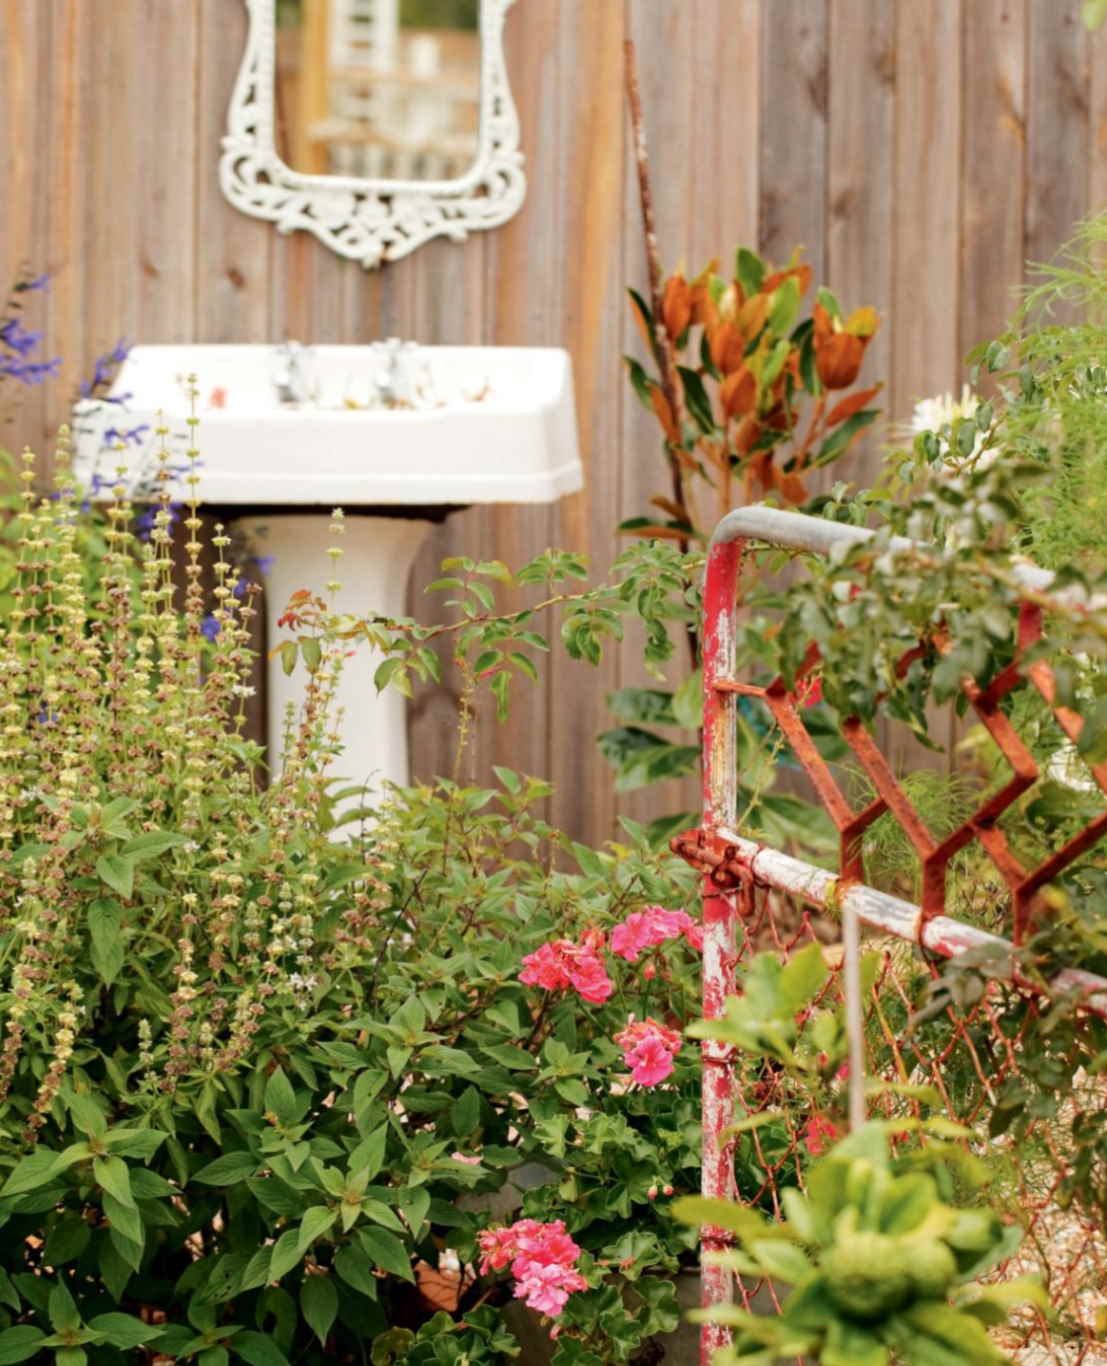 Gardening-with-old-metal-gate-and-sink